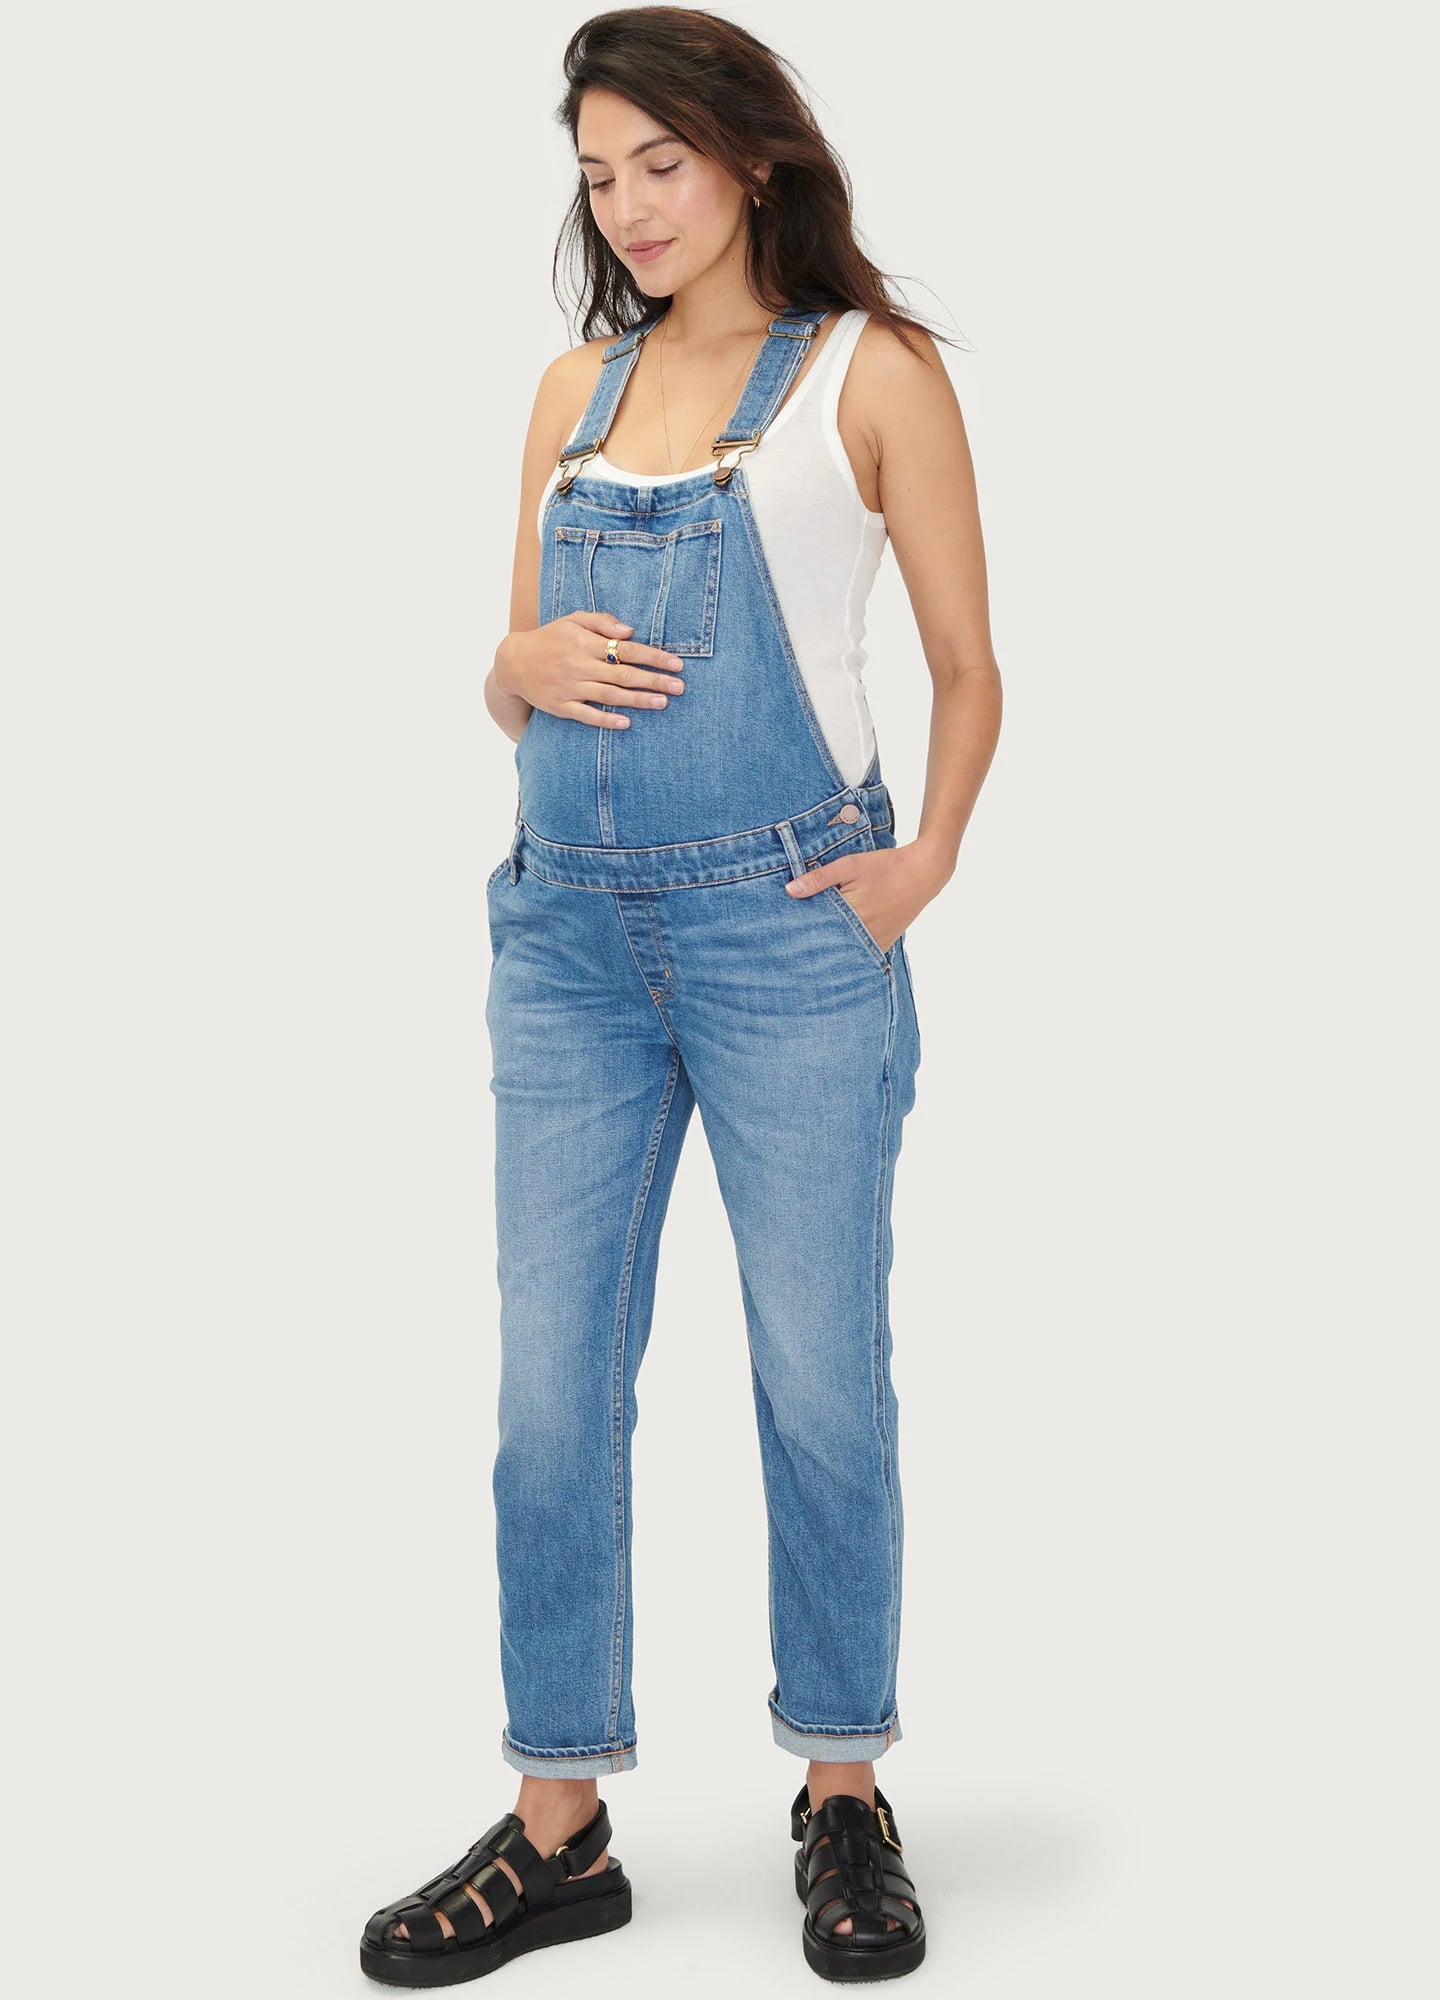 Hatch Collection Launches a Maternity Denim Line With Current